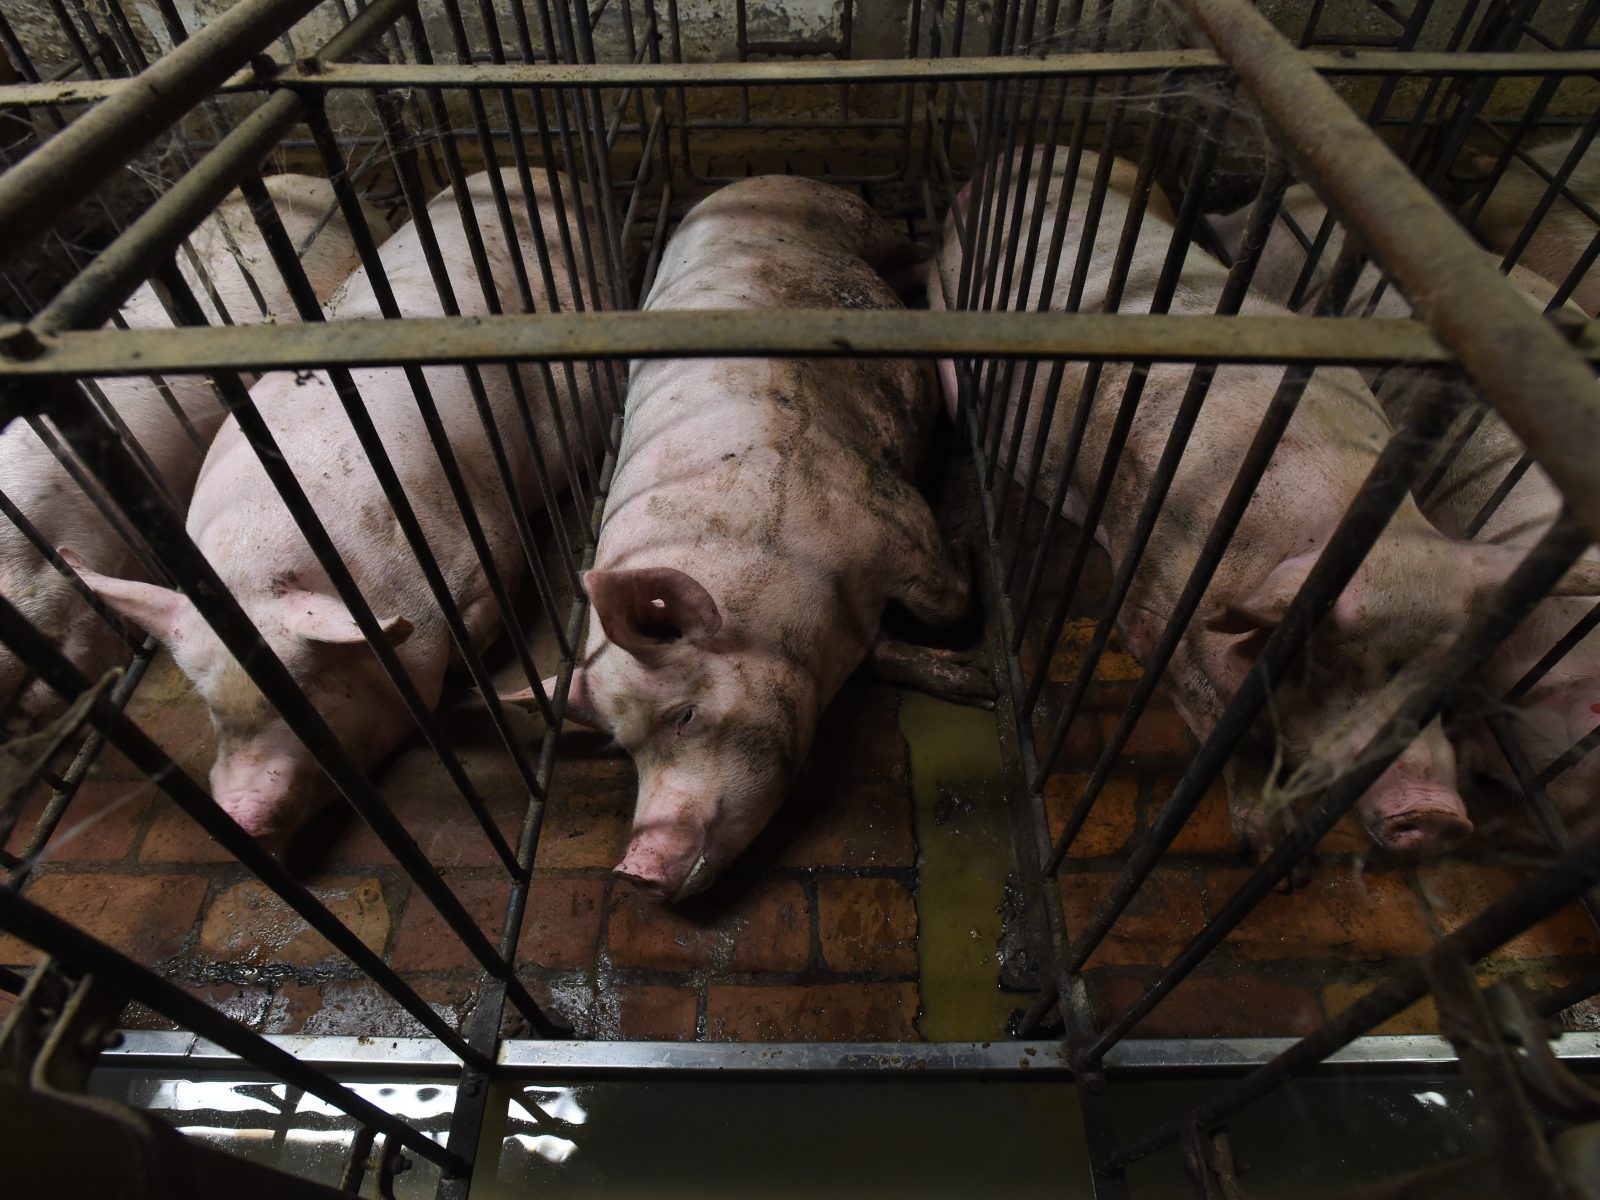 Line of pigs, confined and isolated by metal bars